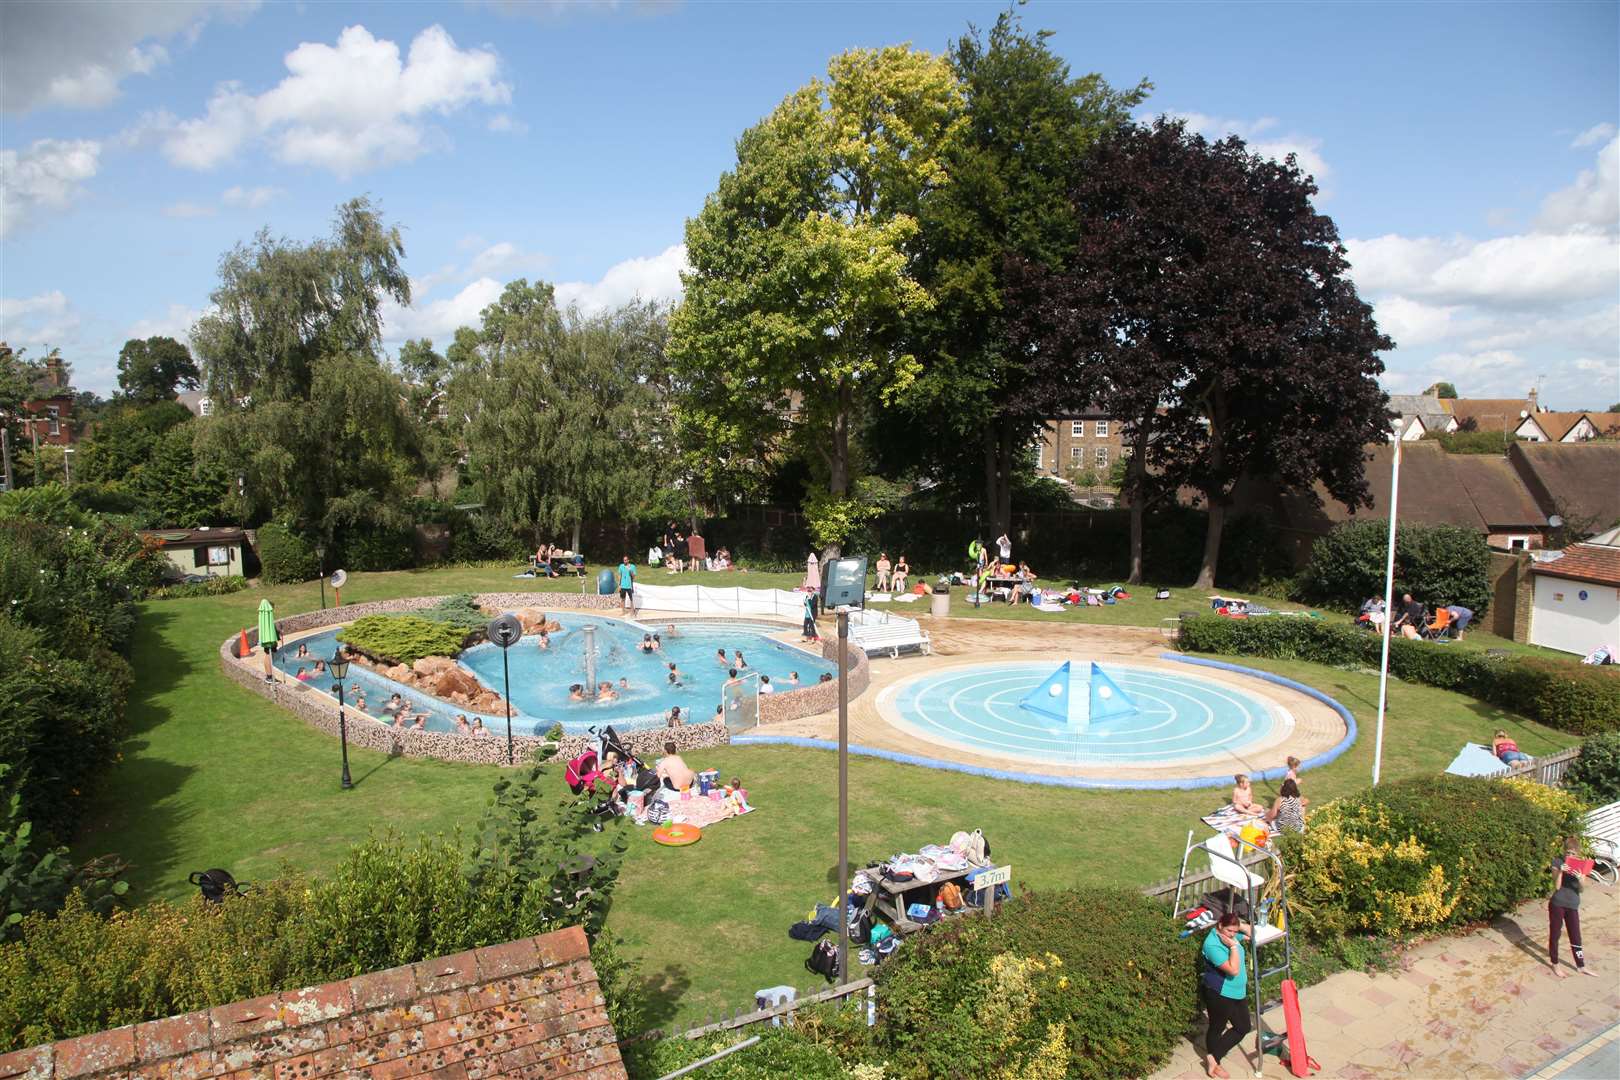 Faversham Pools was rated second best outdoor swimming facility in the country by the Daily Mail